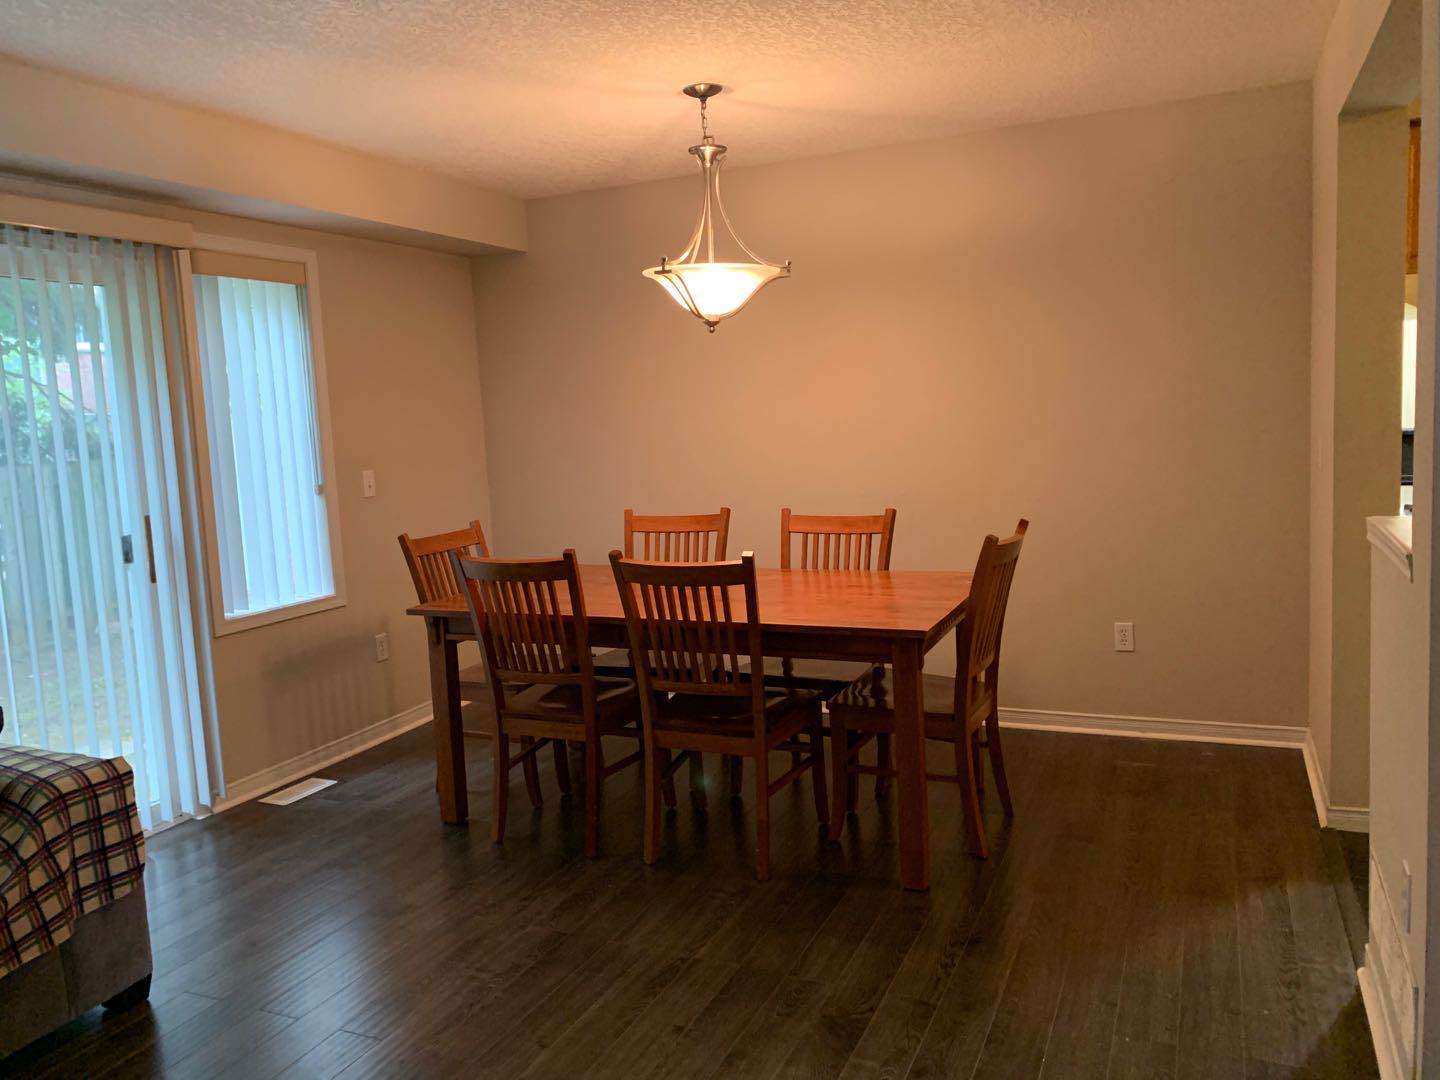 3 bdrm + finished basement END UNIT TOWNHOUSE in Kitchener Fairview/Kingsdale